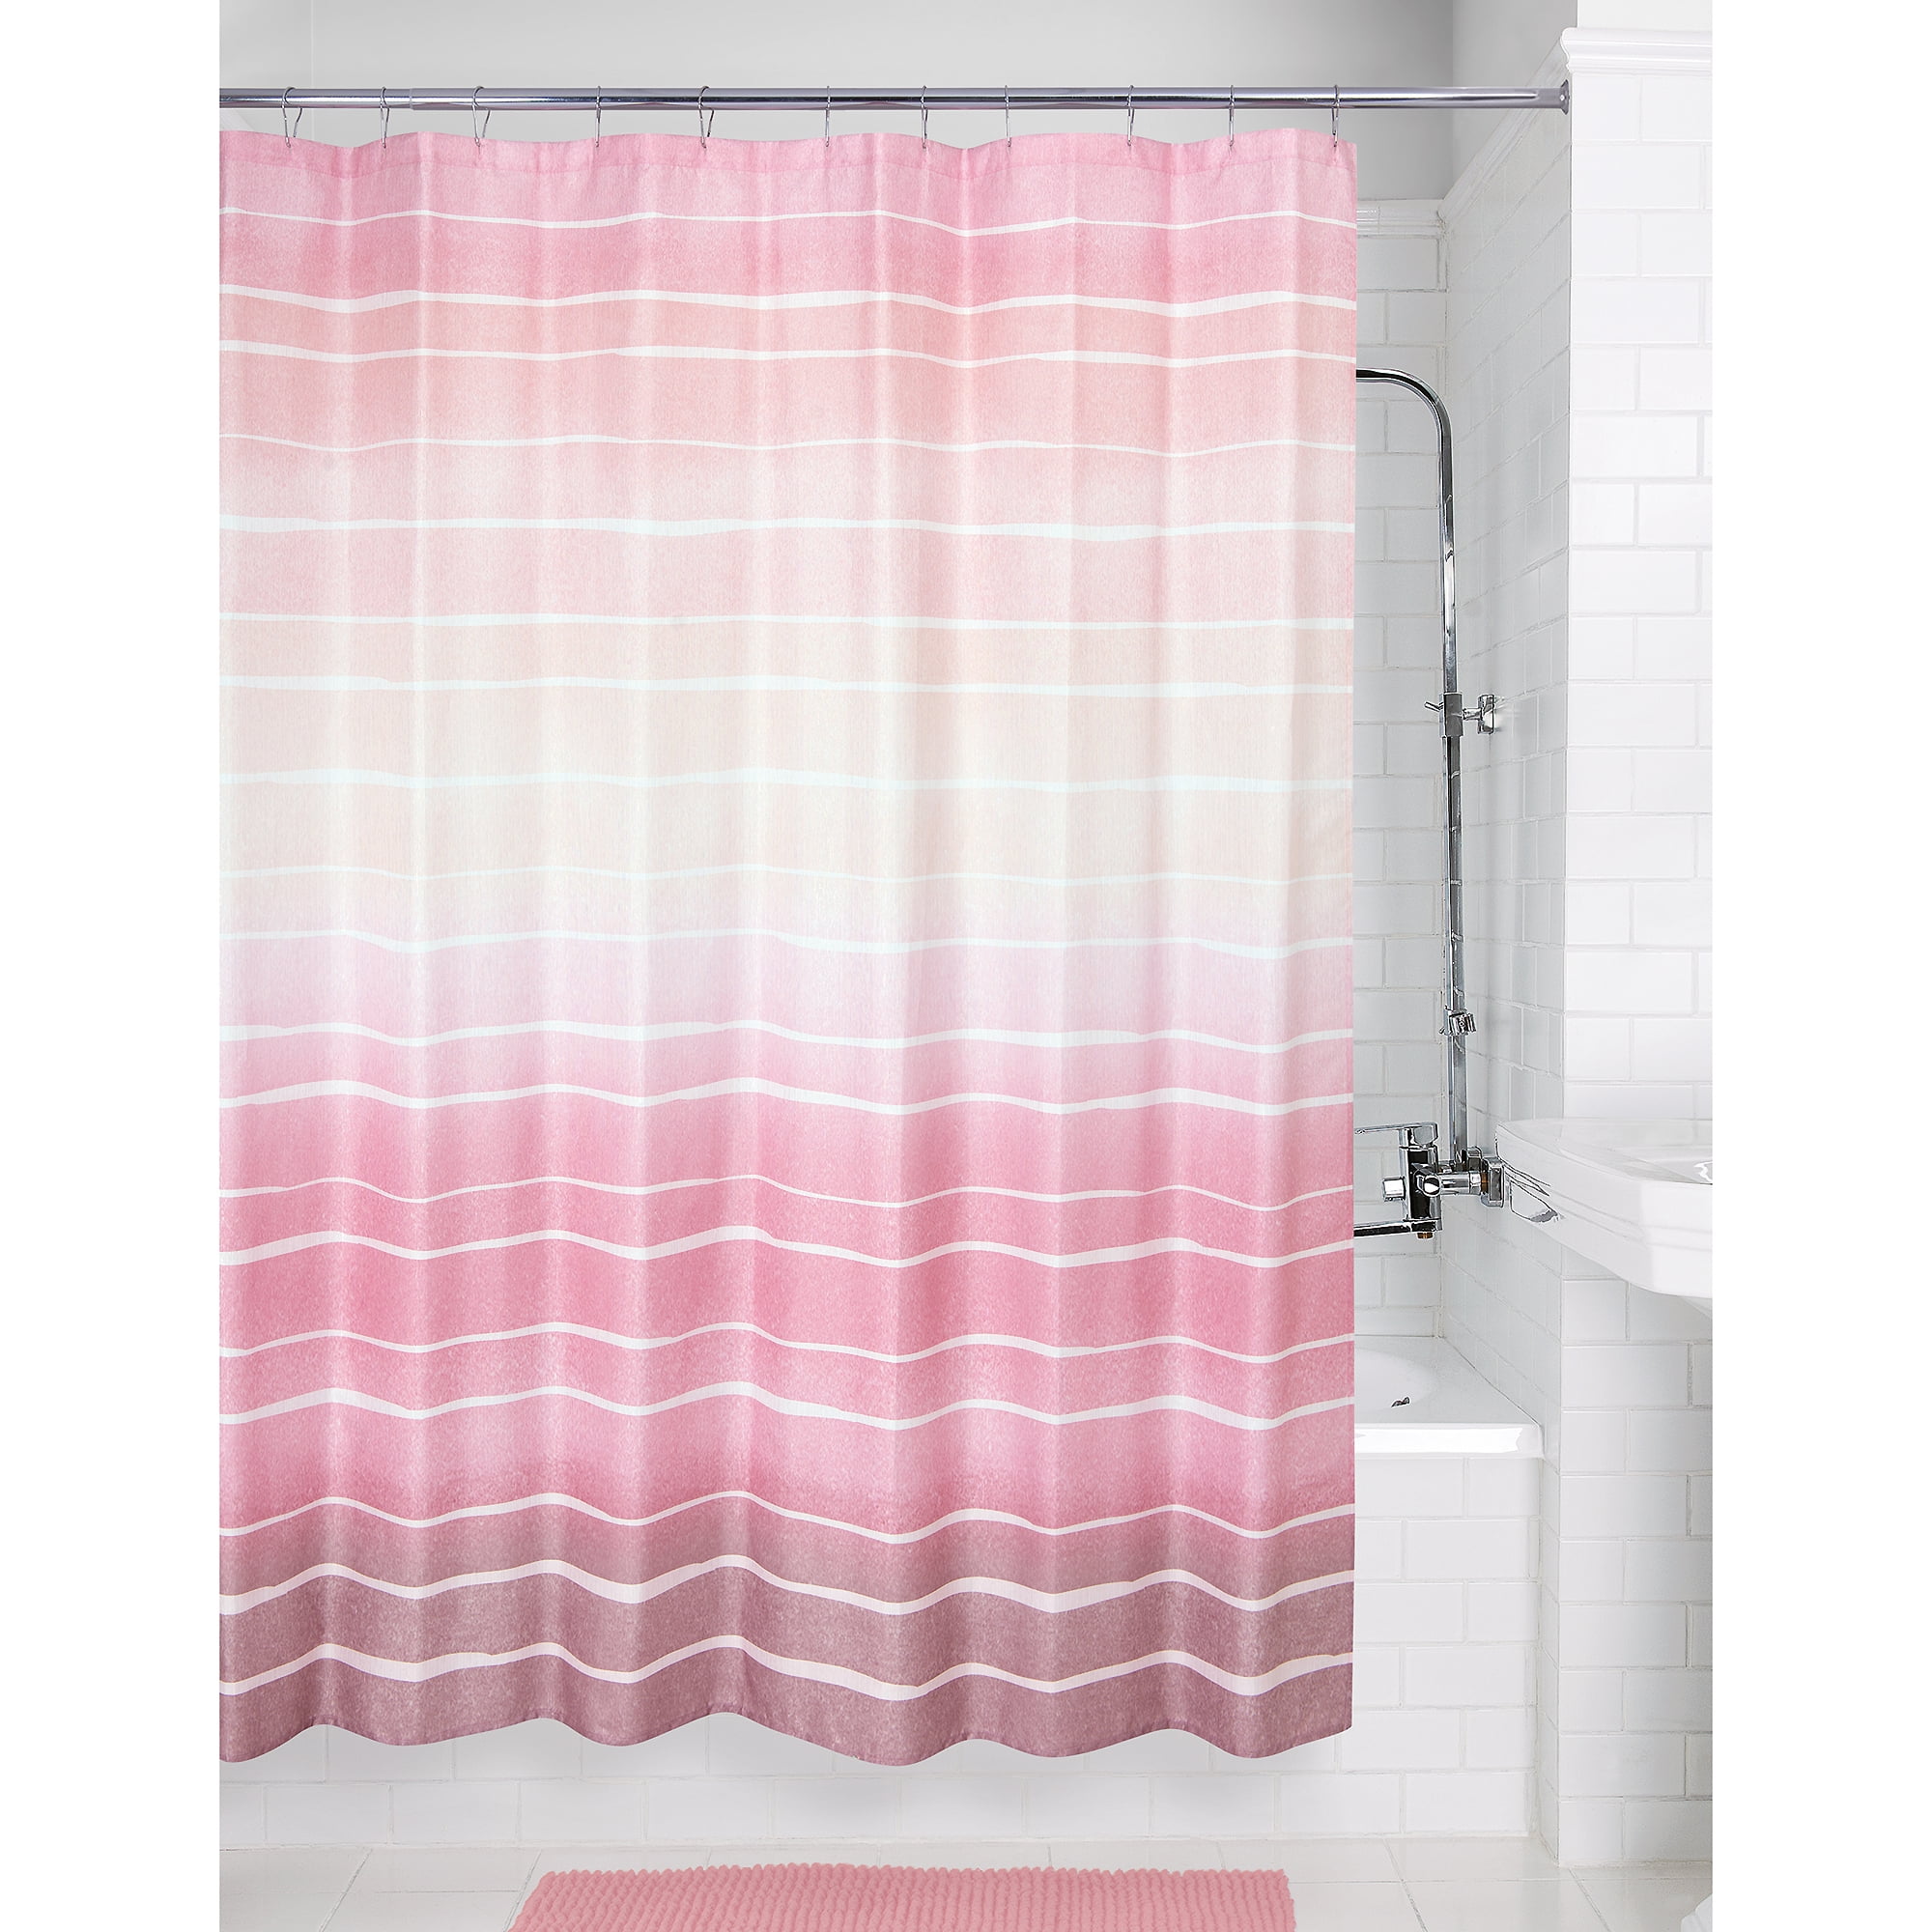 D DS CURTAIN Ombre Lace Gray Fabric Printed Grey Waterproof Polyester Shower Curtain for Bathroom,72 W x 72 H